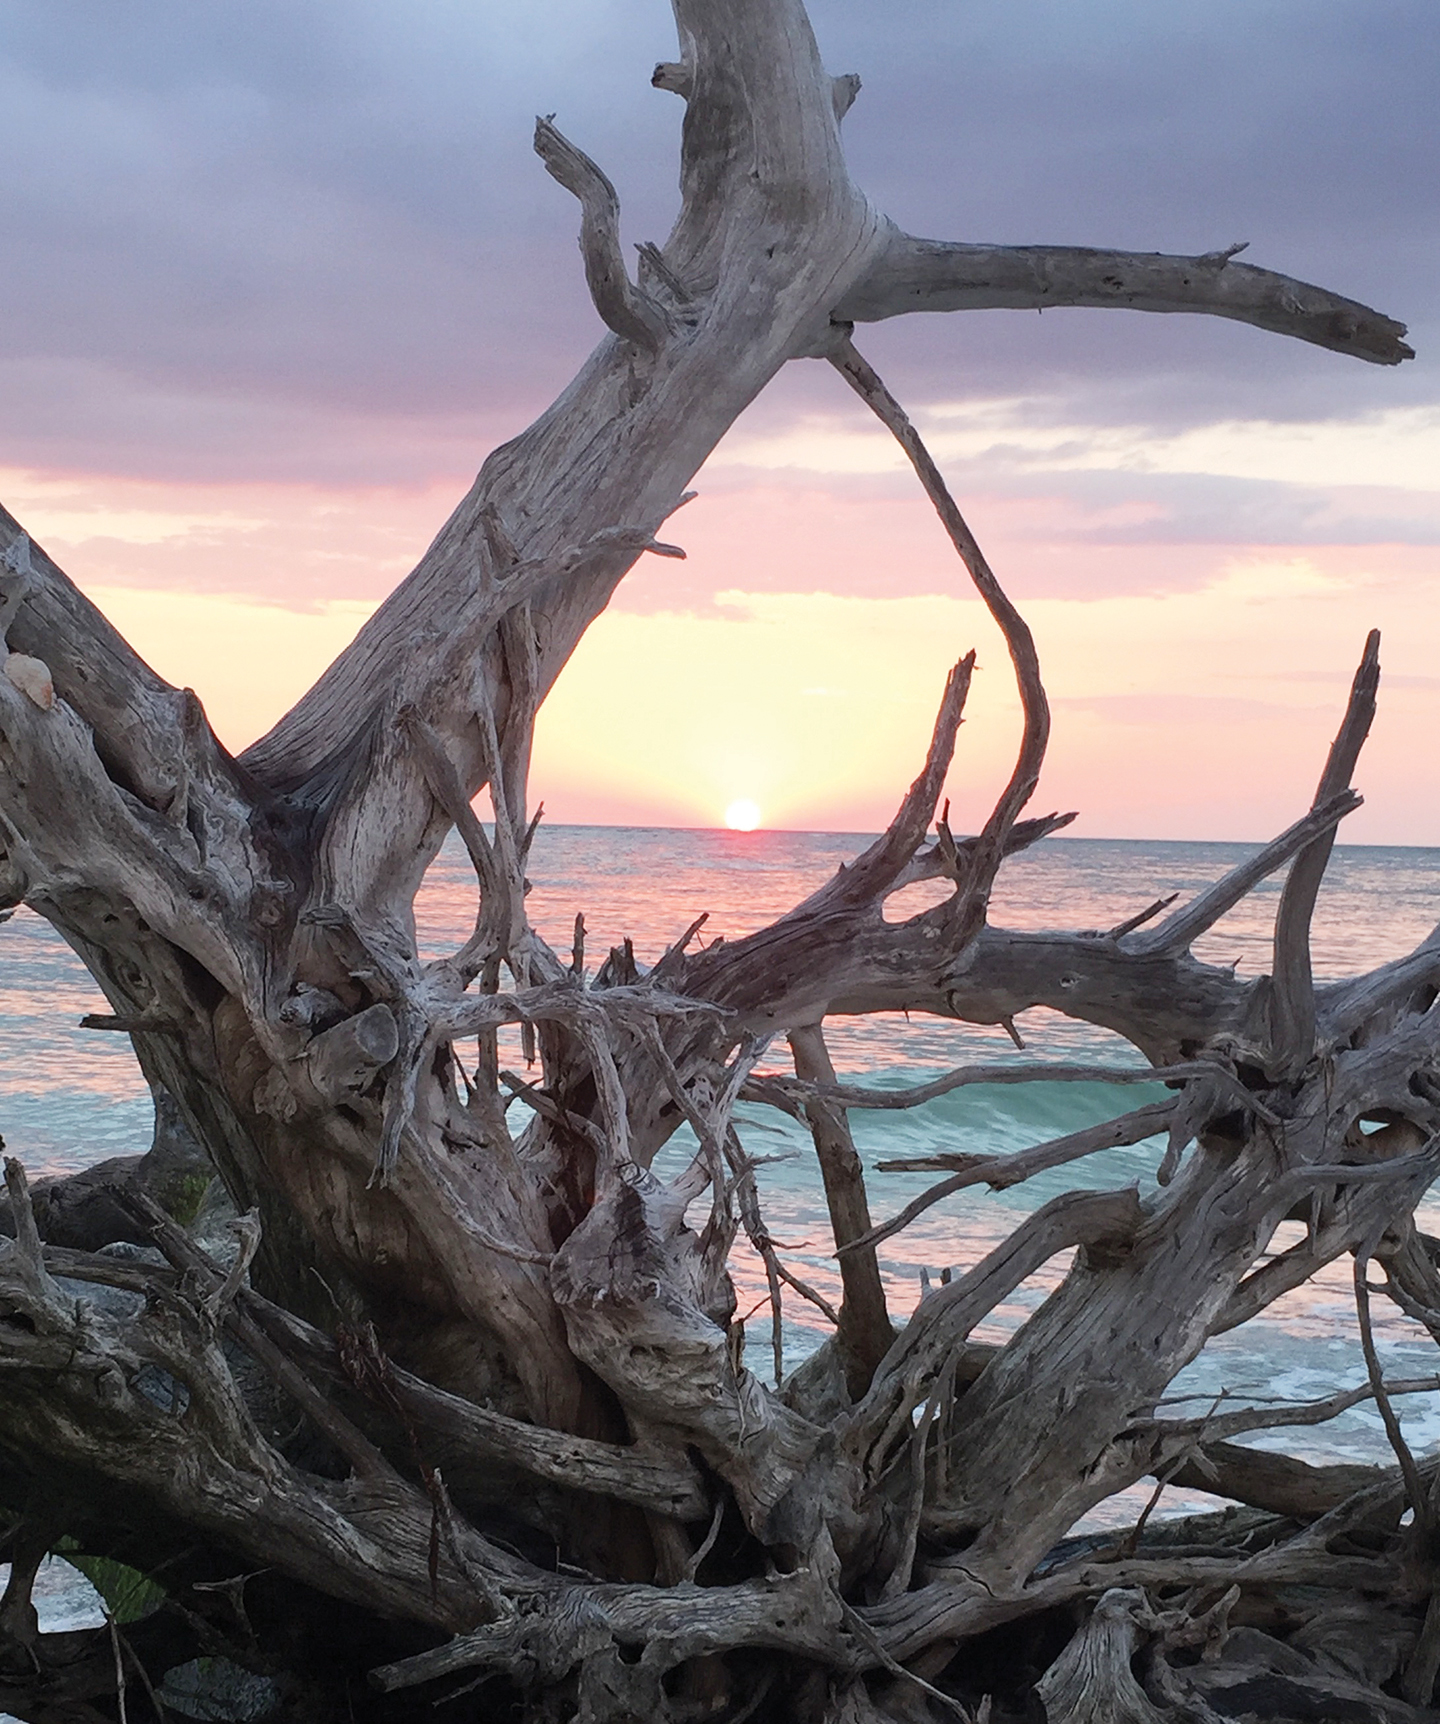 JoAnn Schwencke photographed this sunset and driftwood at Beer Can Island.